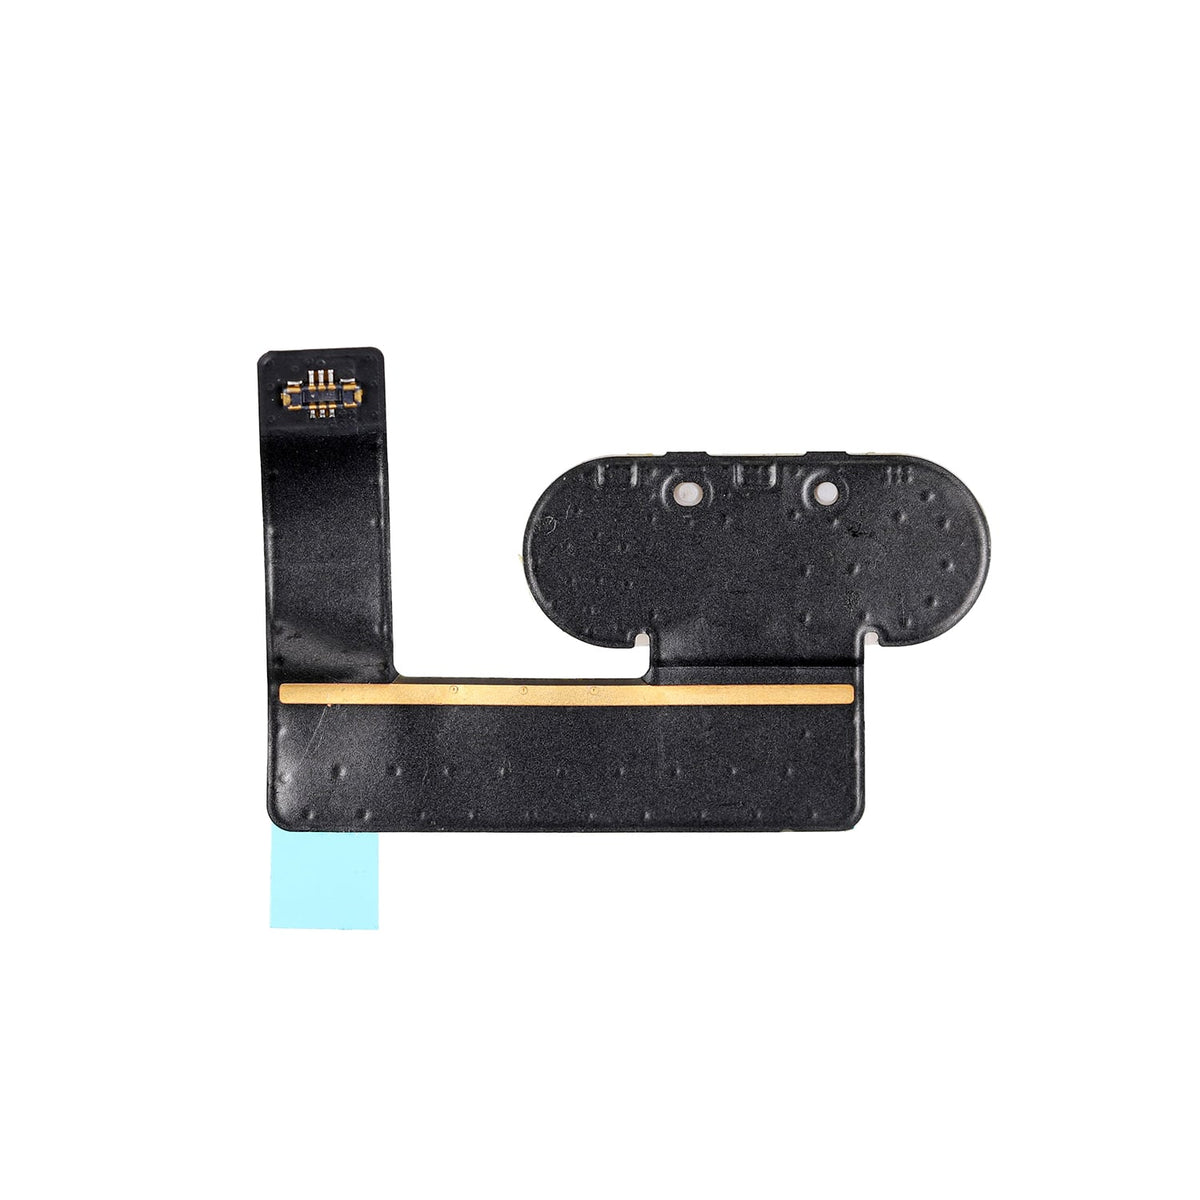 SMART KEYBOARD FLEX CABLE FOR IPAD PRO 11" 2ND GEN - SILVER